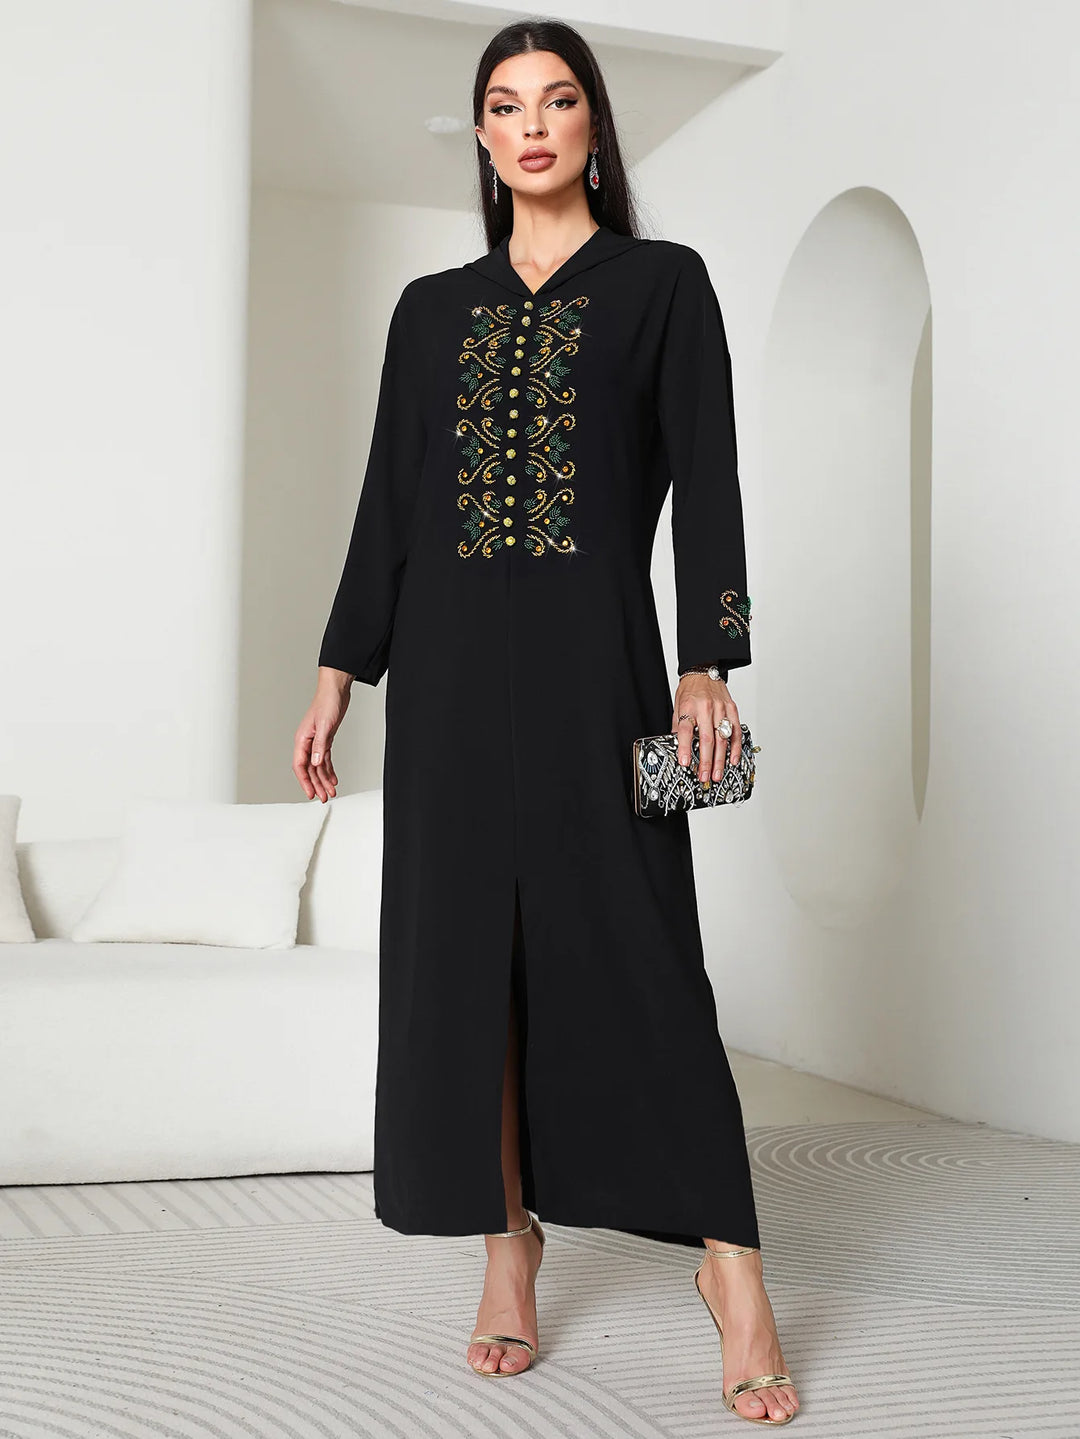 Everyday Hooded Abaya Dress | All For Me Today